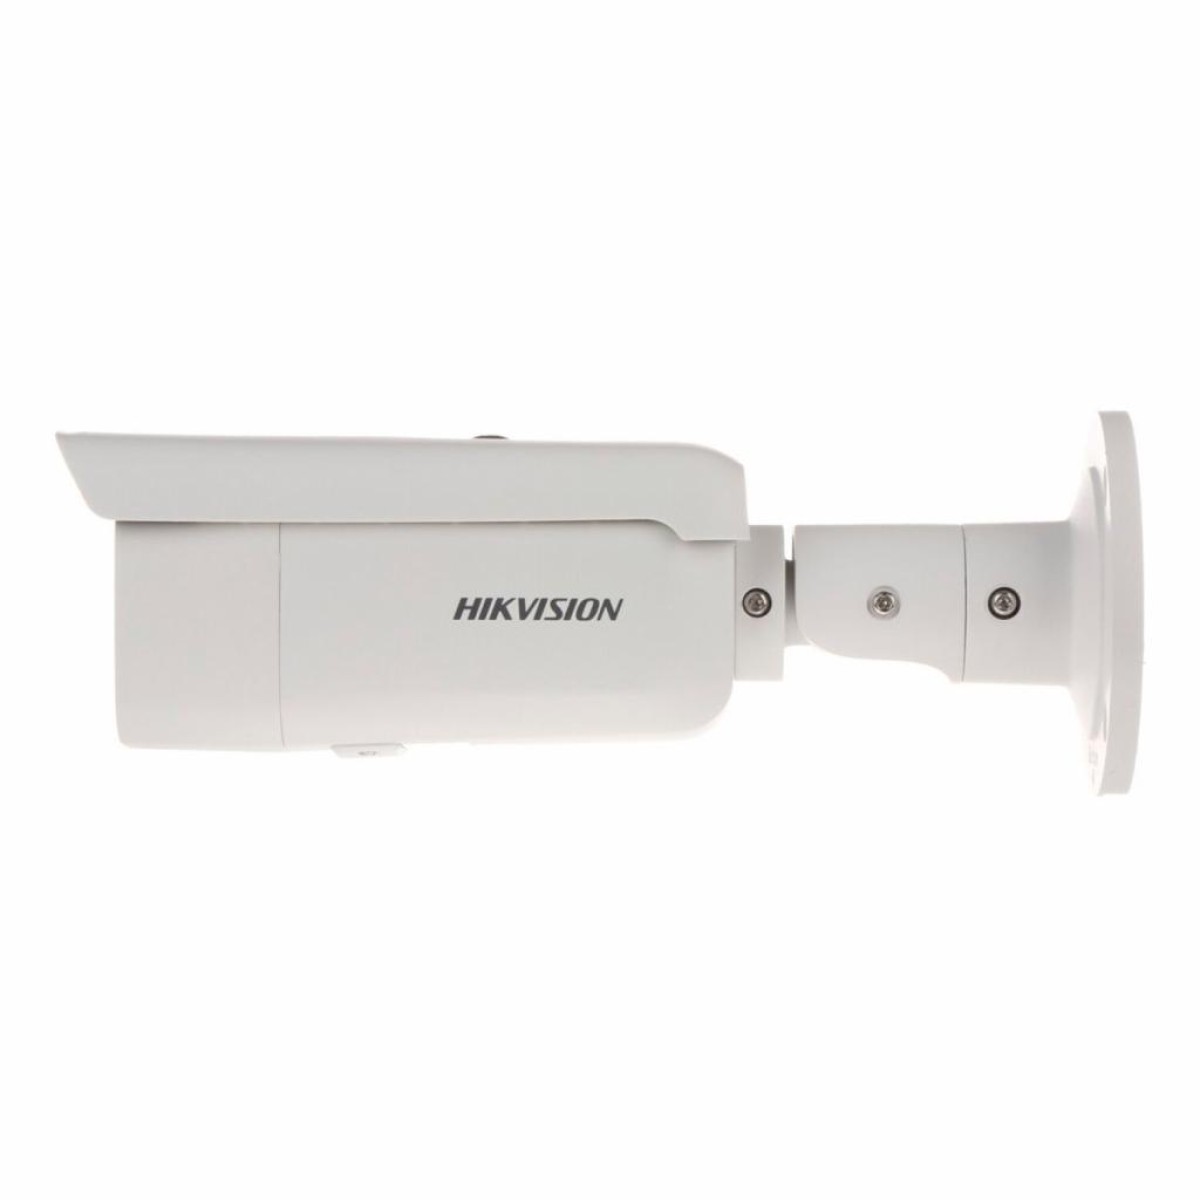 IP-камера Hikvision DS-2CD2T85G1-I8 (2.8) 98_98.jpg - фото 3